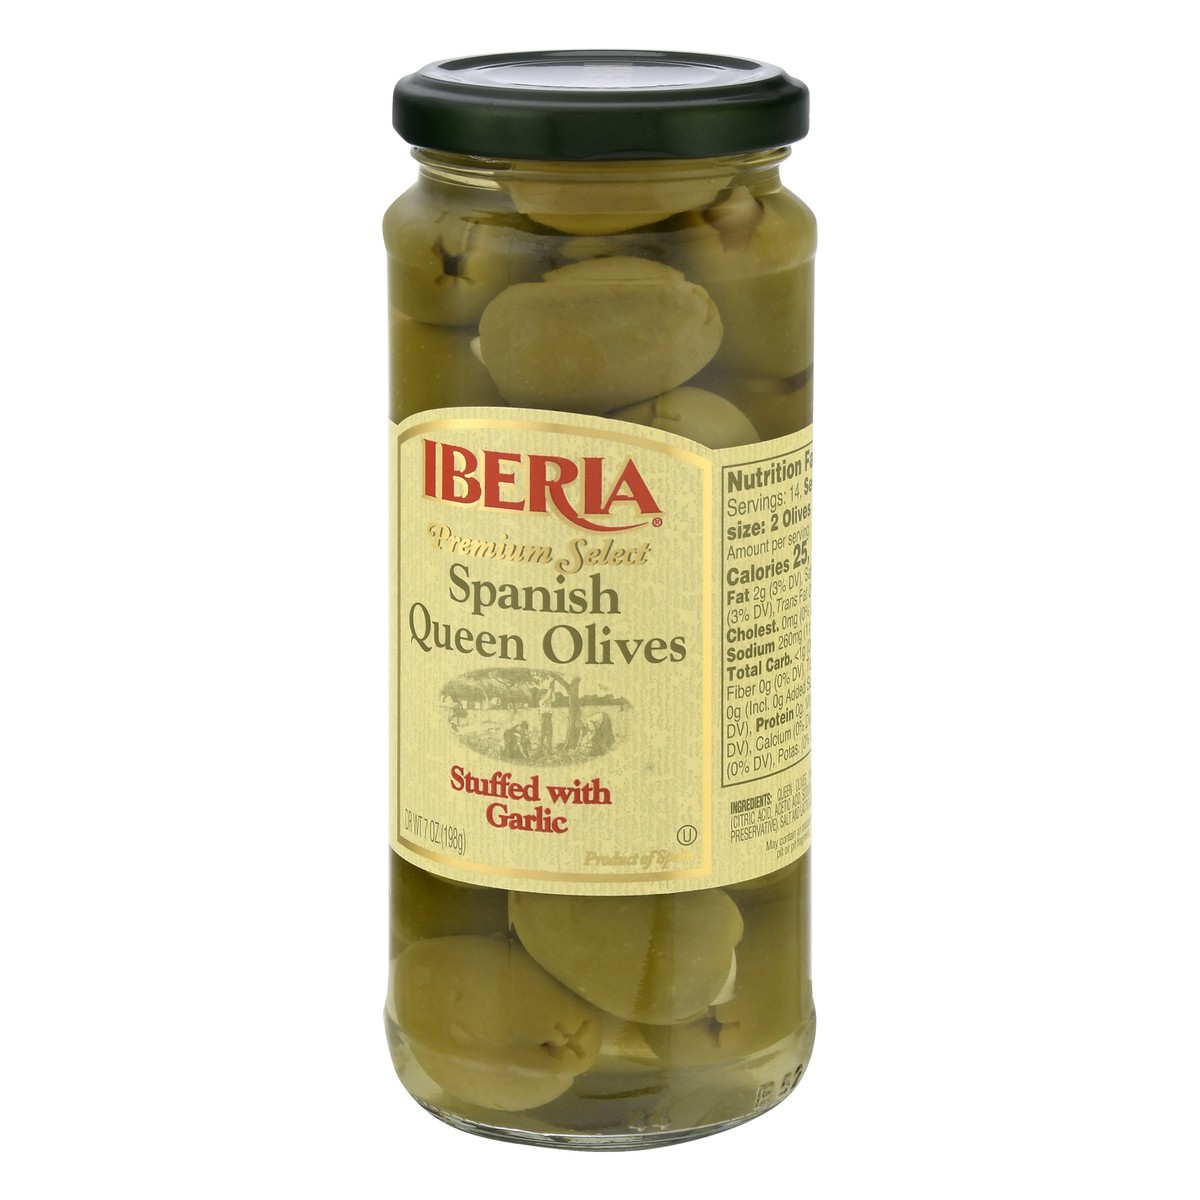 slide 3 of 12, Iberia Spanish Stuffed with Garlic Queen Olives 7 oz, 7 oz